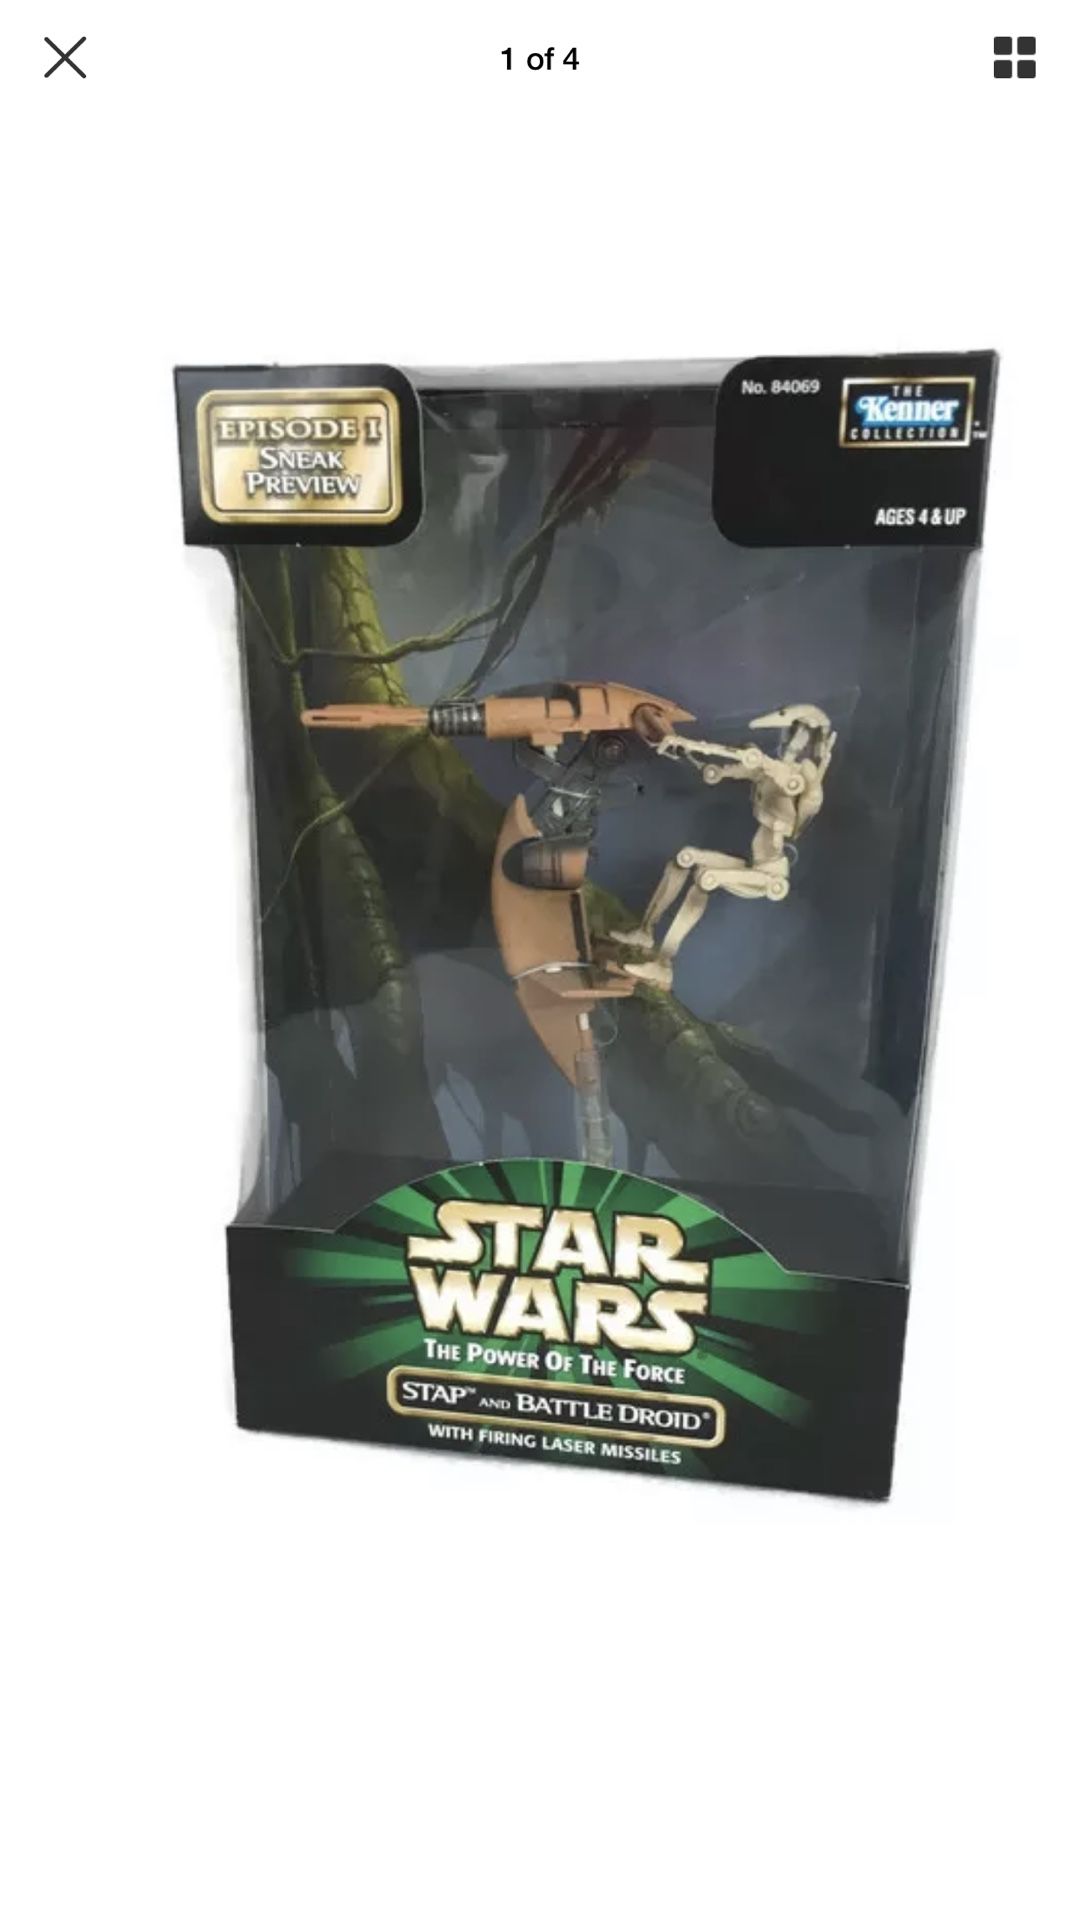 Star Wars POTF (Power of the Force) COLLECTION: Stap + Battle Droid (Episode I Sneak Preview Edition) Authentically Styled Action Figure by Kenner